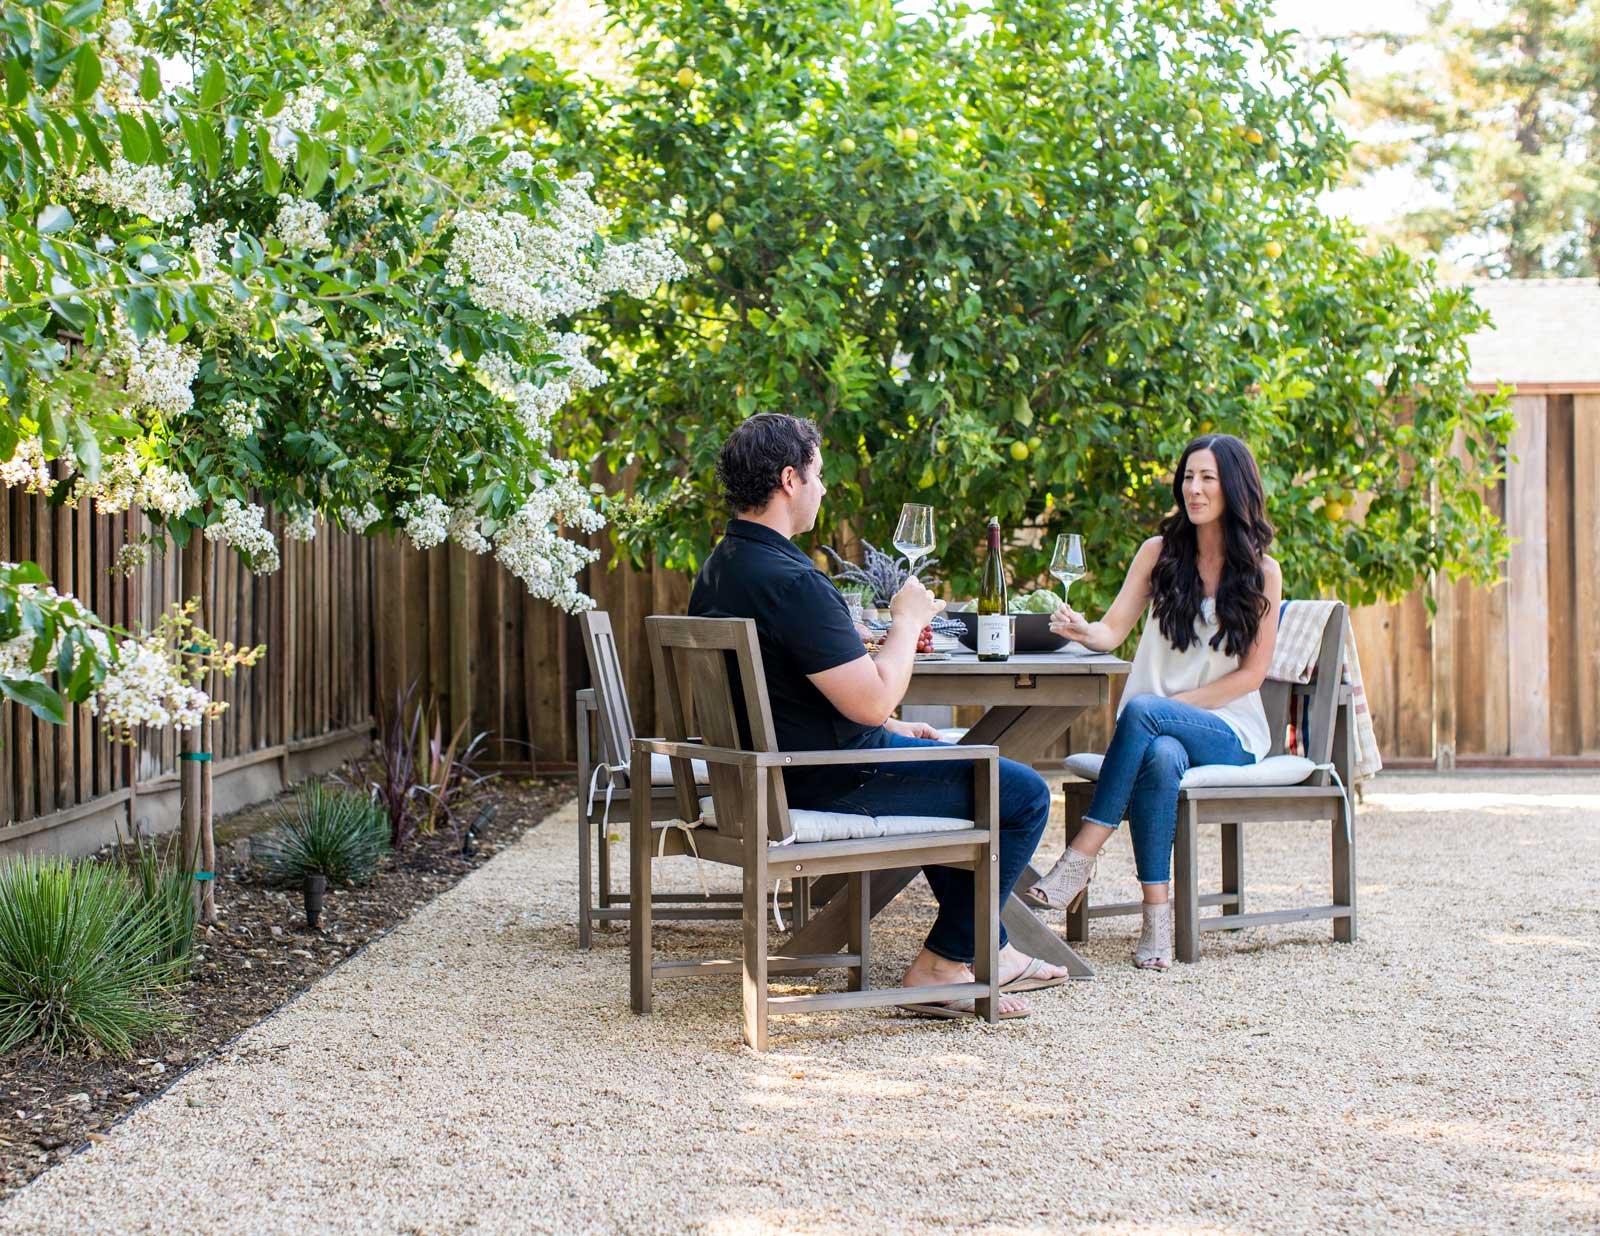 Fenced backyard with a man and woman sitting in a dining area with colored gravel.